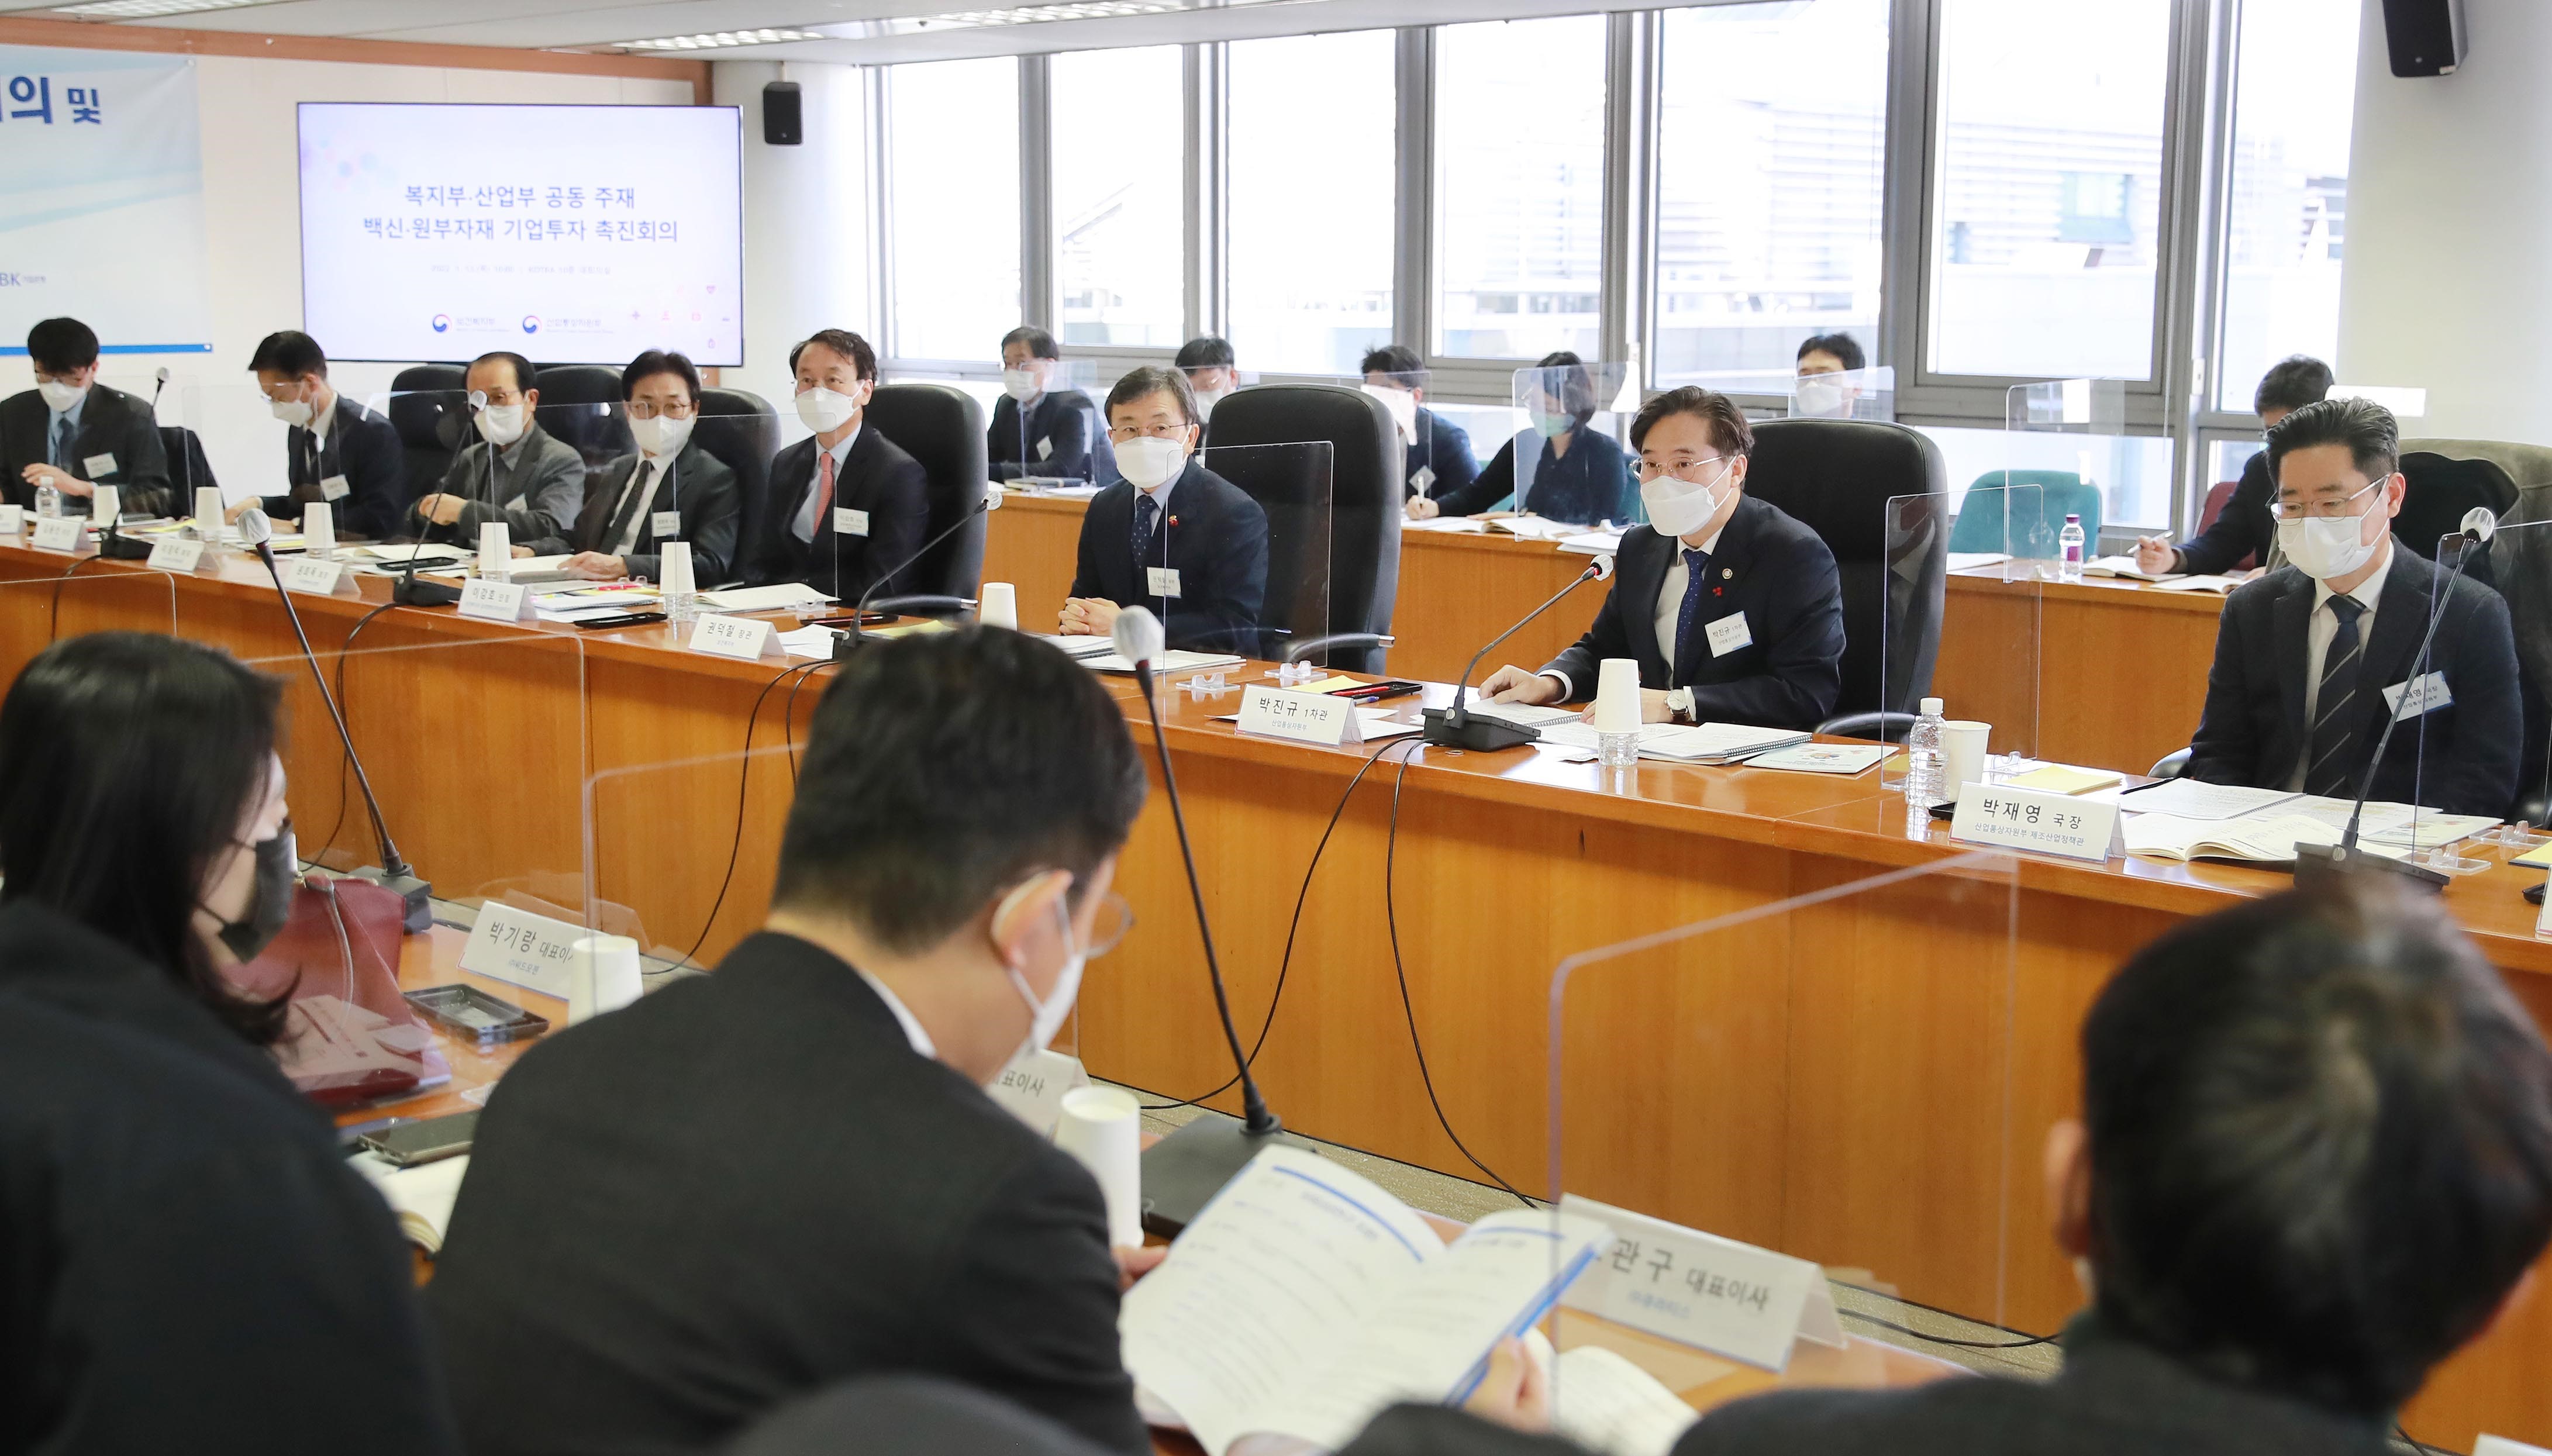 Corporate investment stimulus meeting for raw and subsidiary vaccine production materials.jpg 1